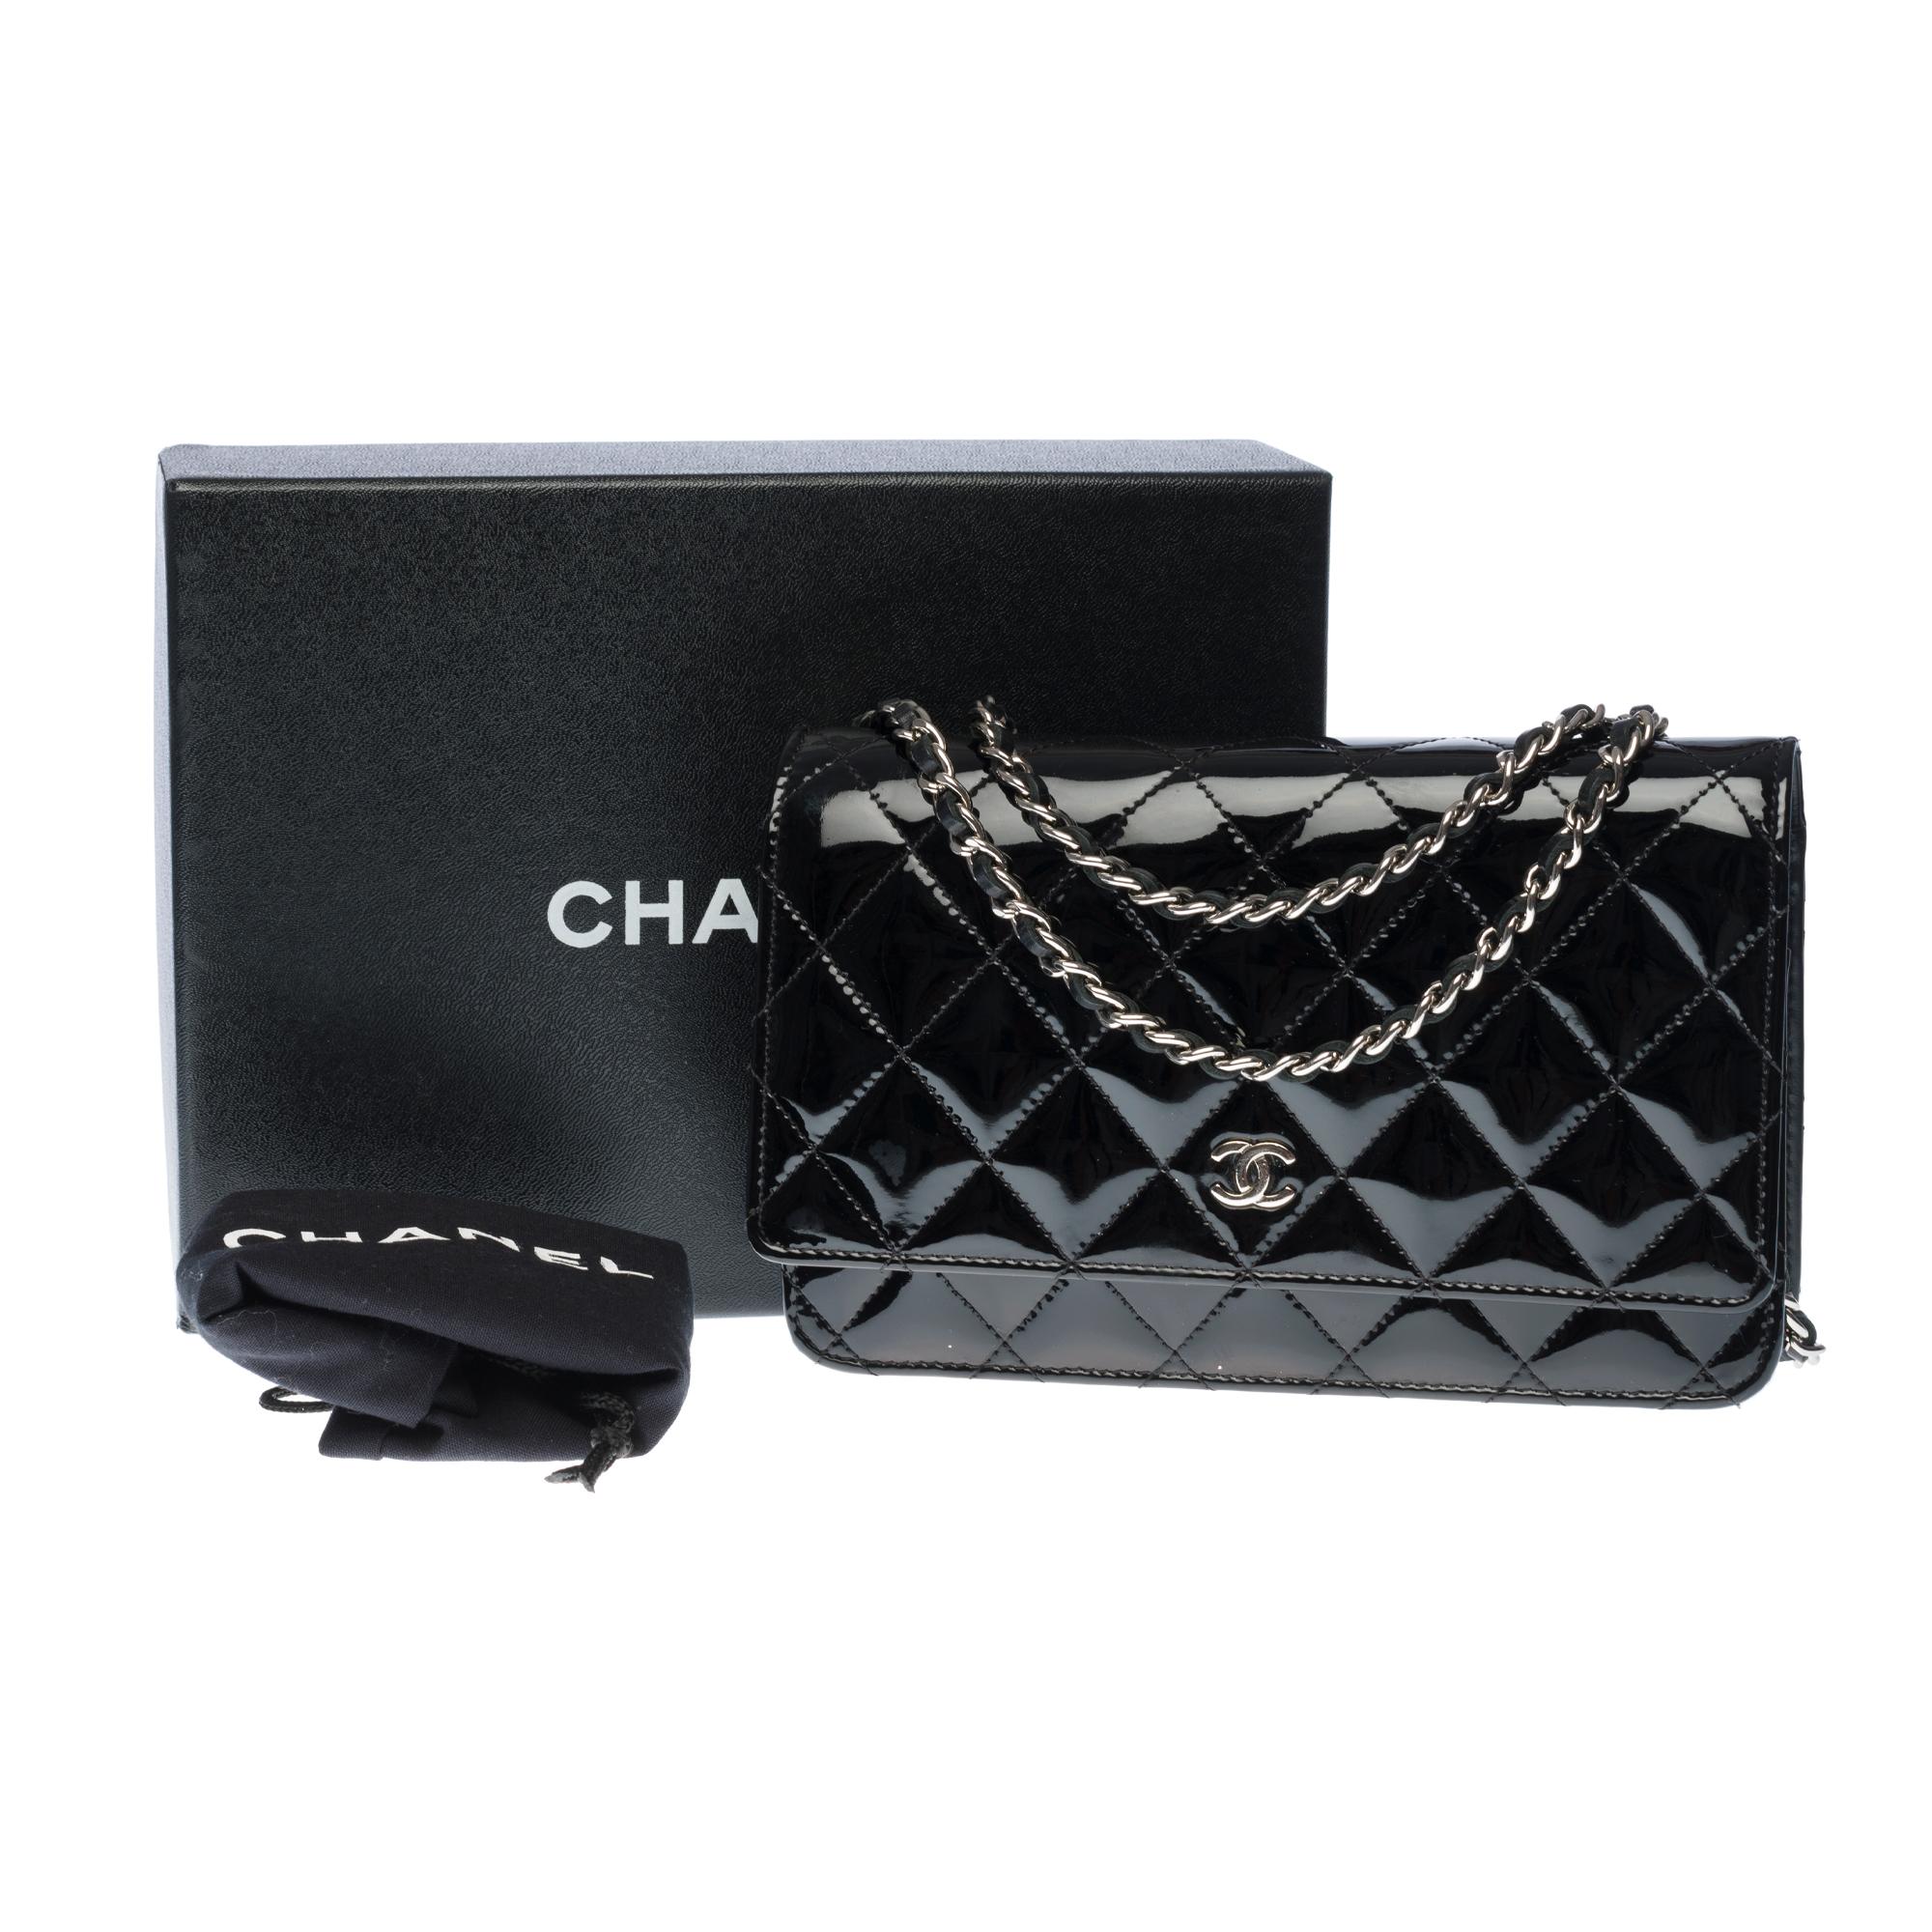 Chanel Wallet on Chain (WOC) shoulder bag in black quilted patent leather, SHW 4